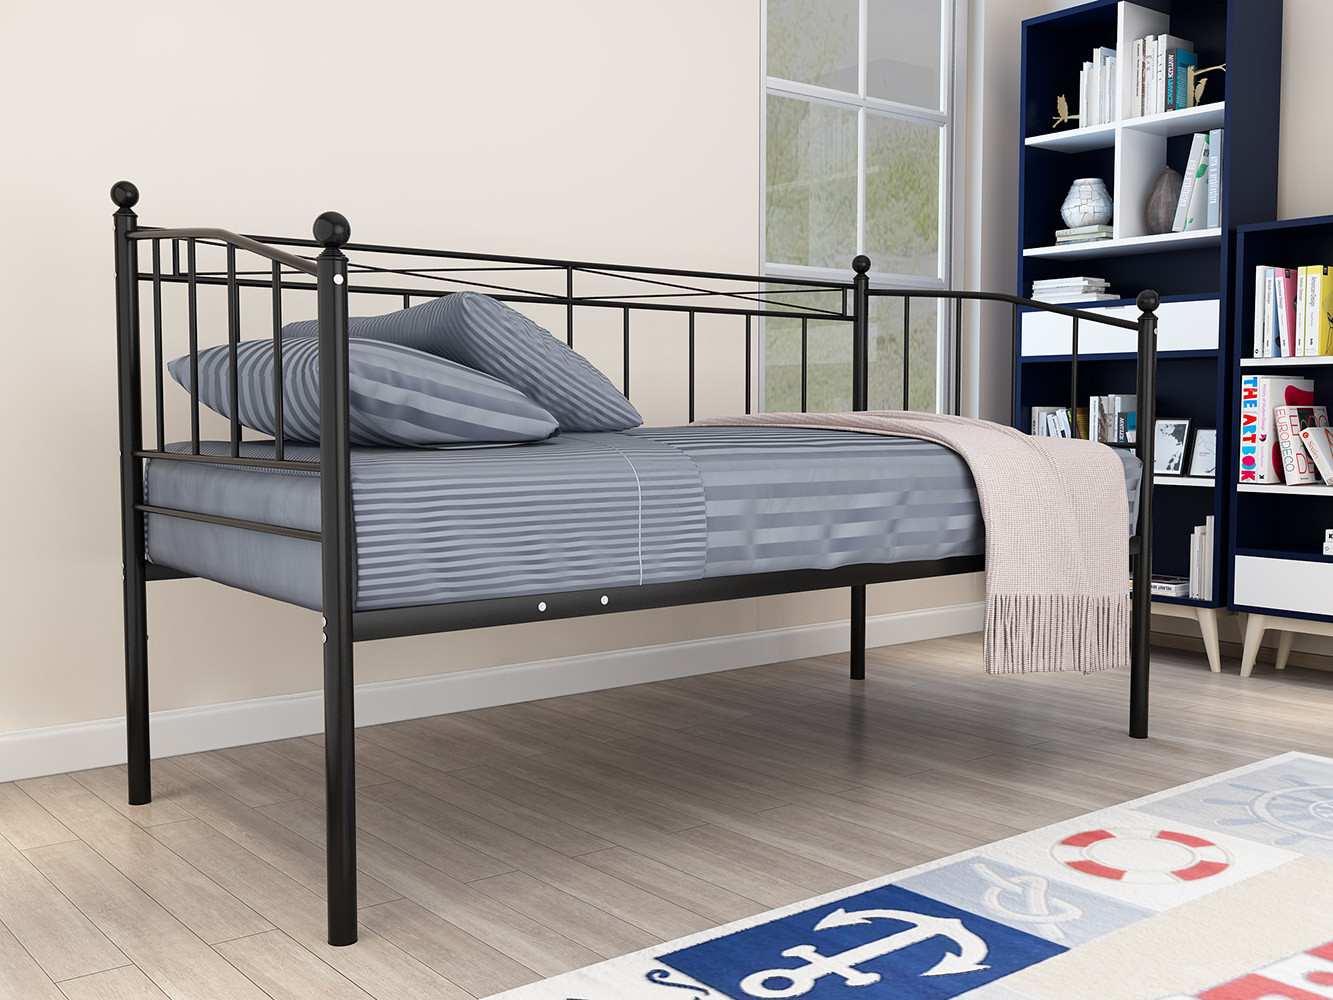 Black Wrought Iron Daybed Frame Indoor Decoration Contemporary Design